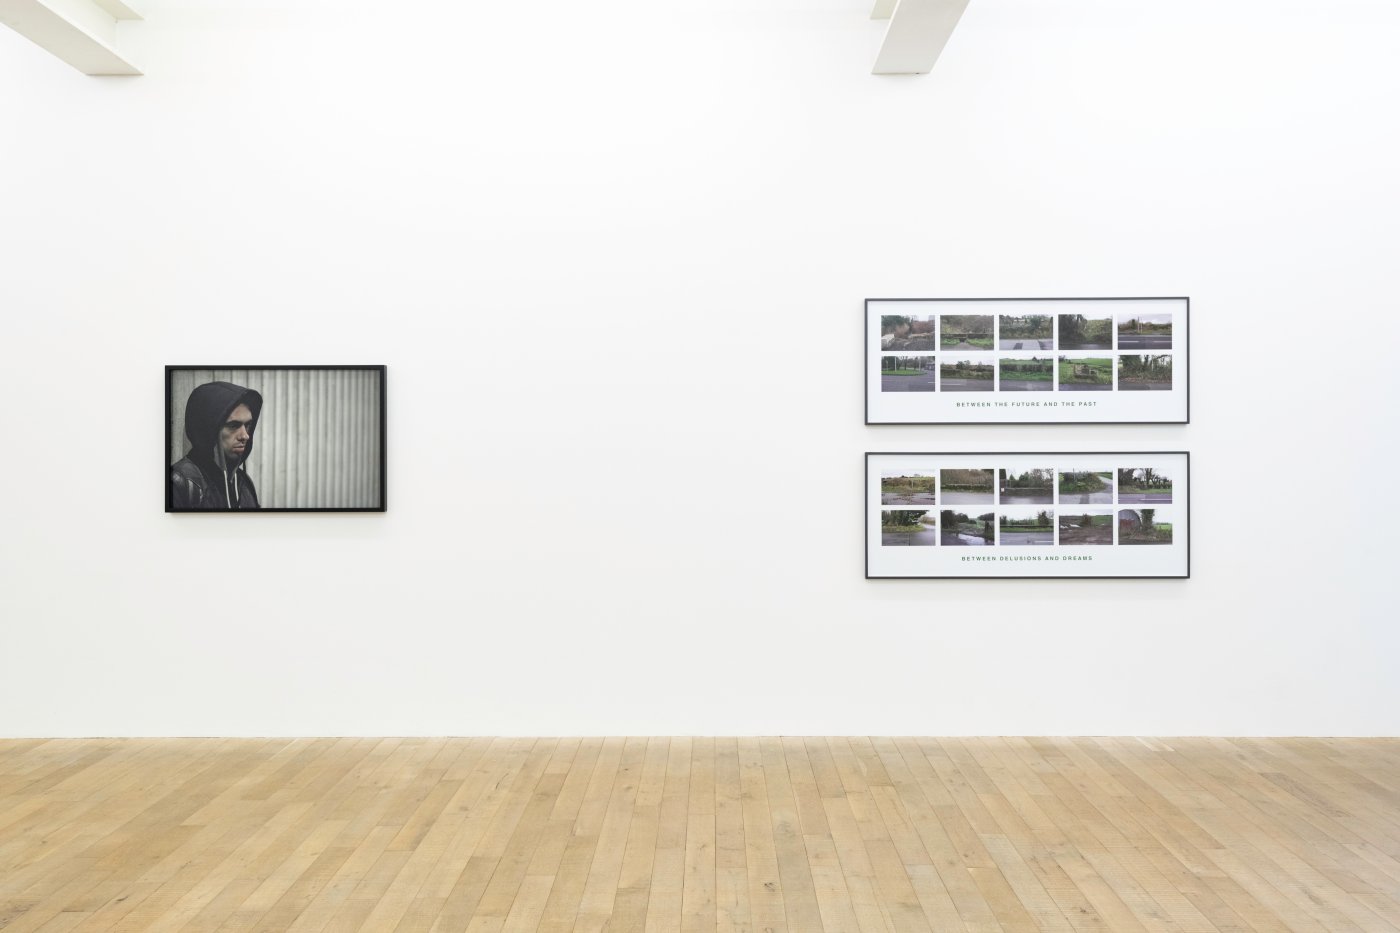 Installation image for The Other Side of the Mirror is Home, at Galerie Peter Kilchmann